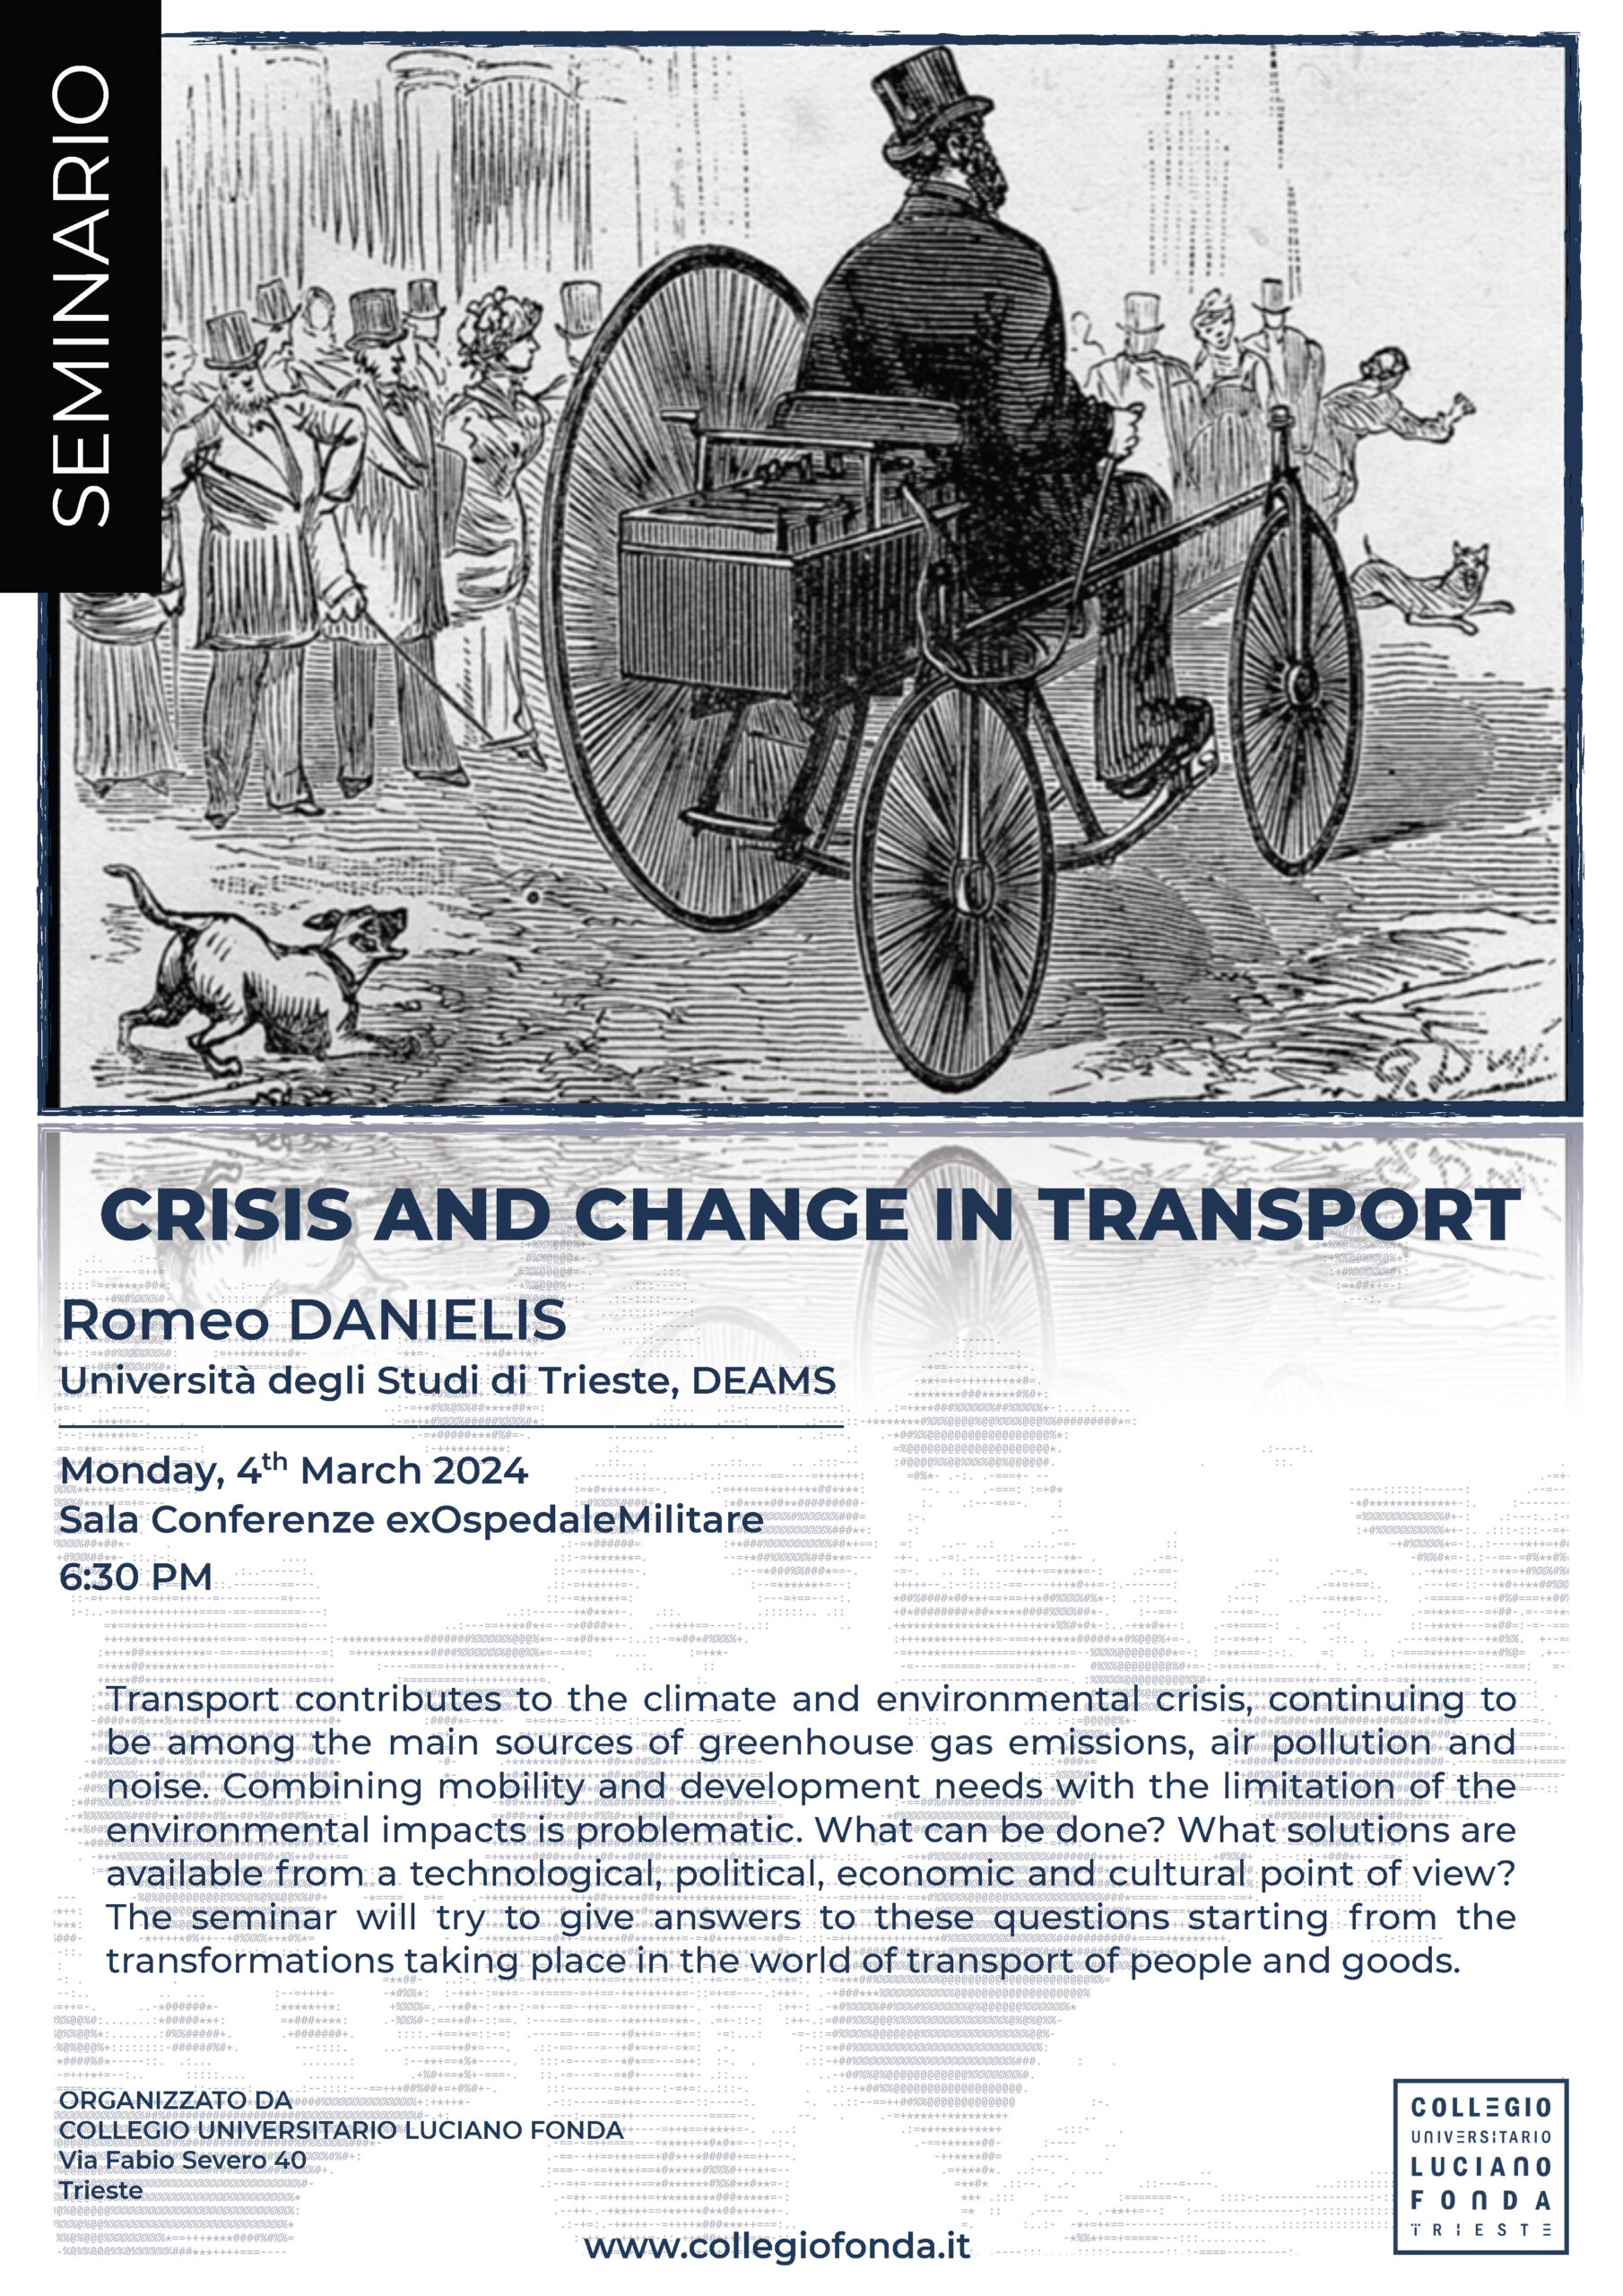 CRISIS AND CHANGE IN TRANSPORT • Seminar by Romeo Danielis – Monday, 4th March 2024